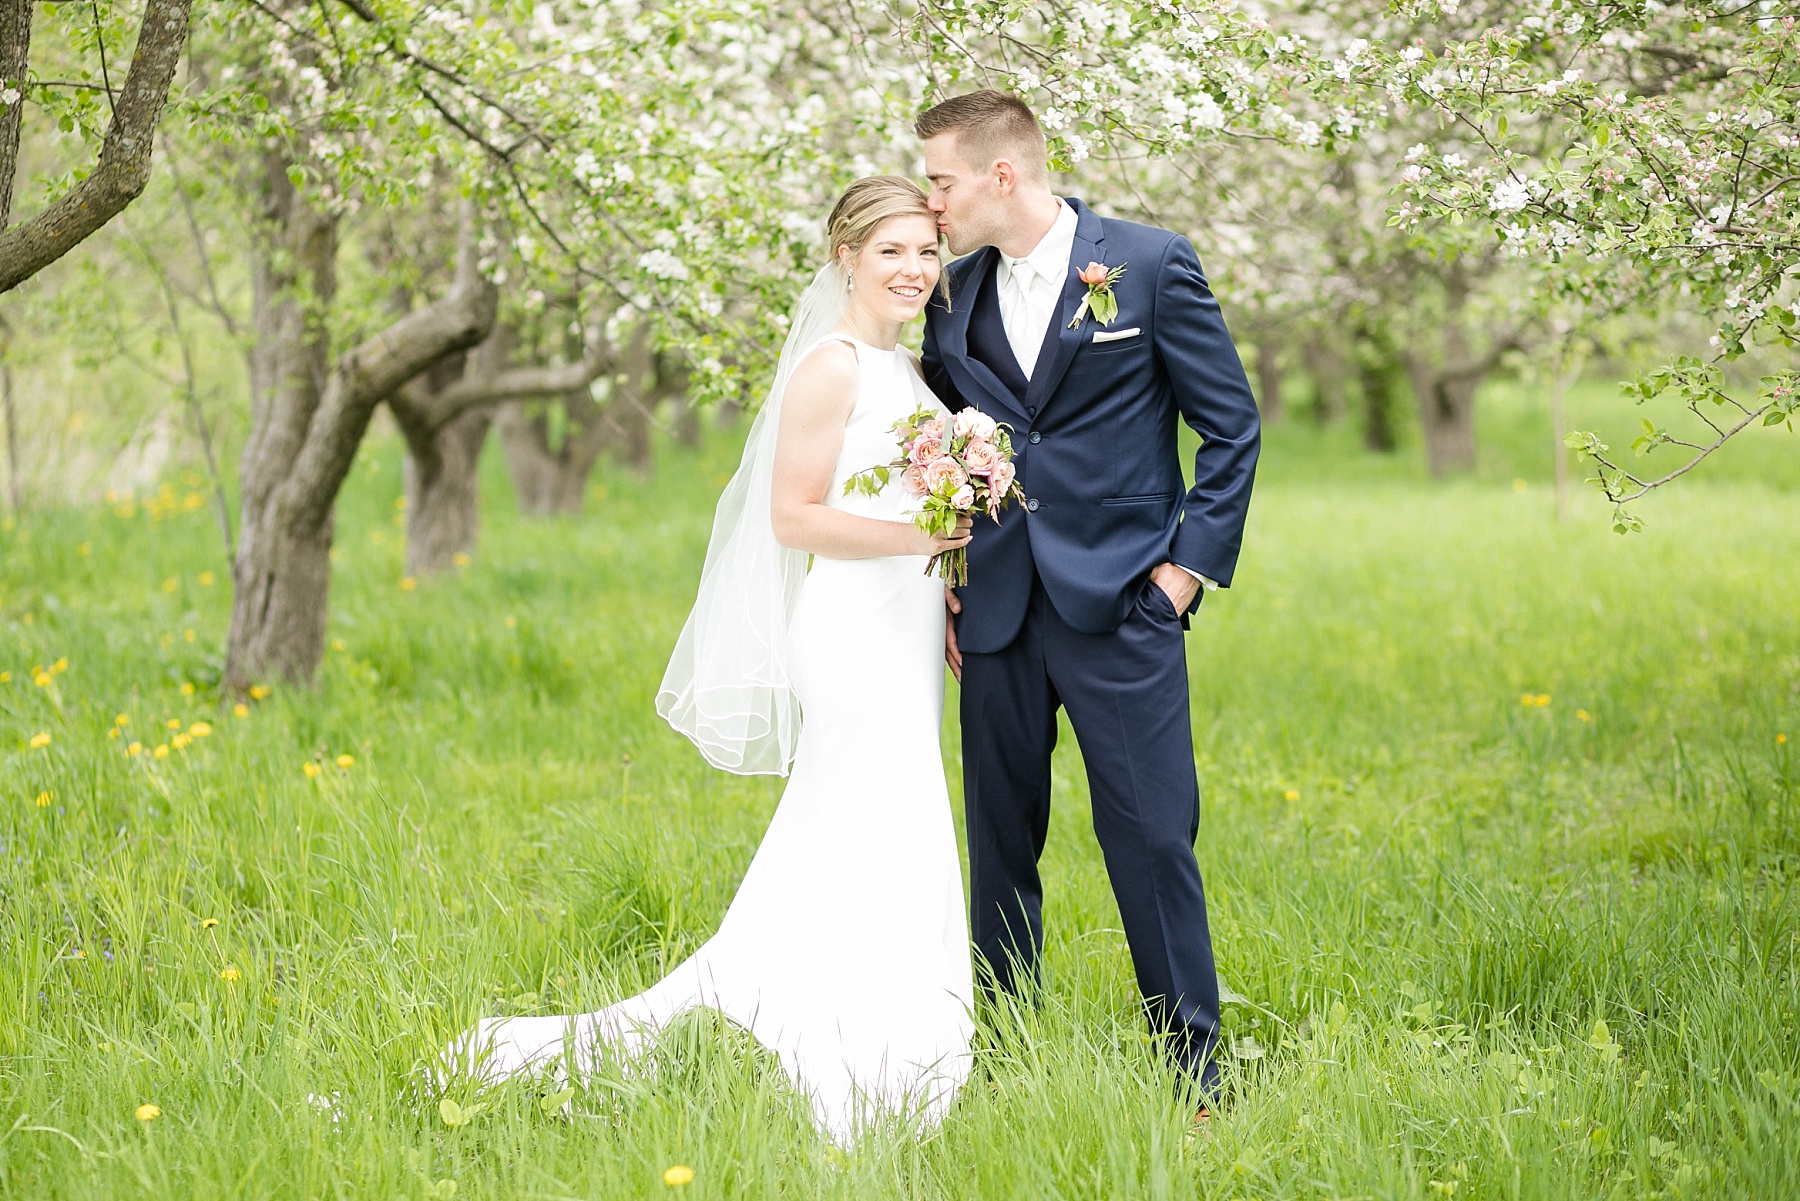 couple with groom kissing brides forehead in apple blossoms in Rice Lake, WI wedding